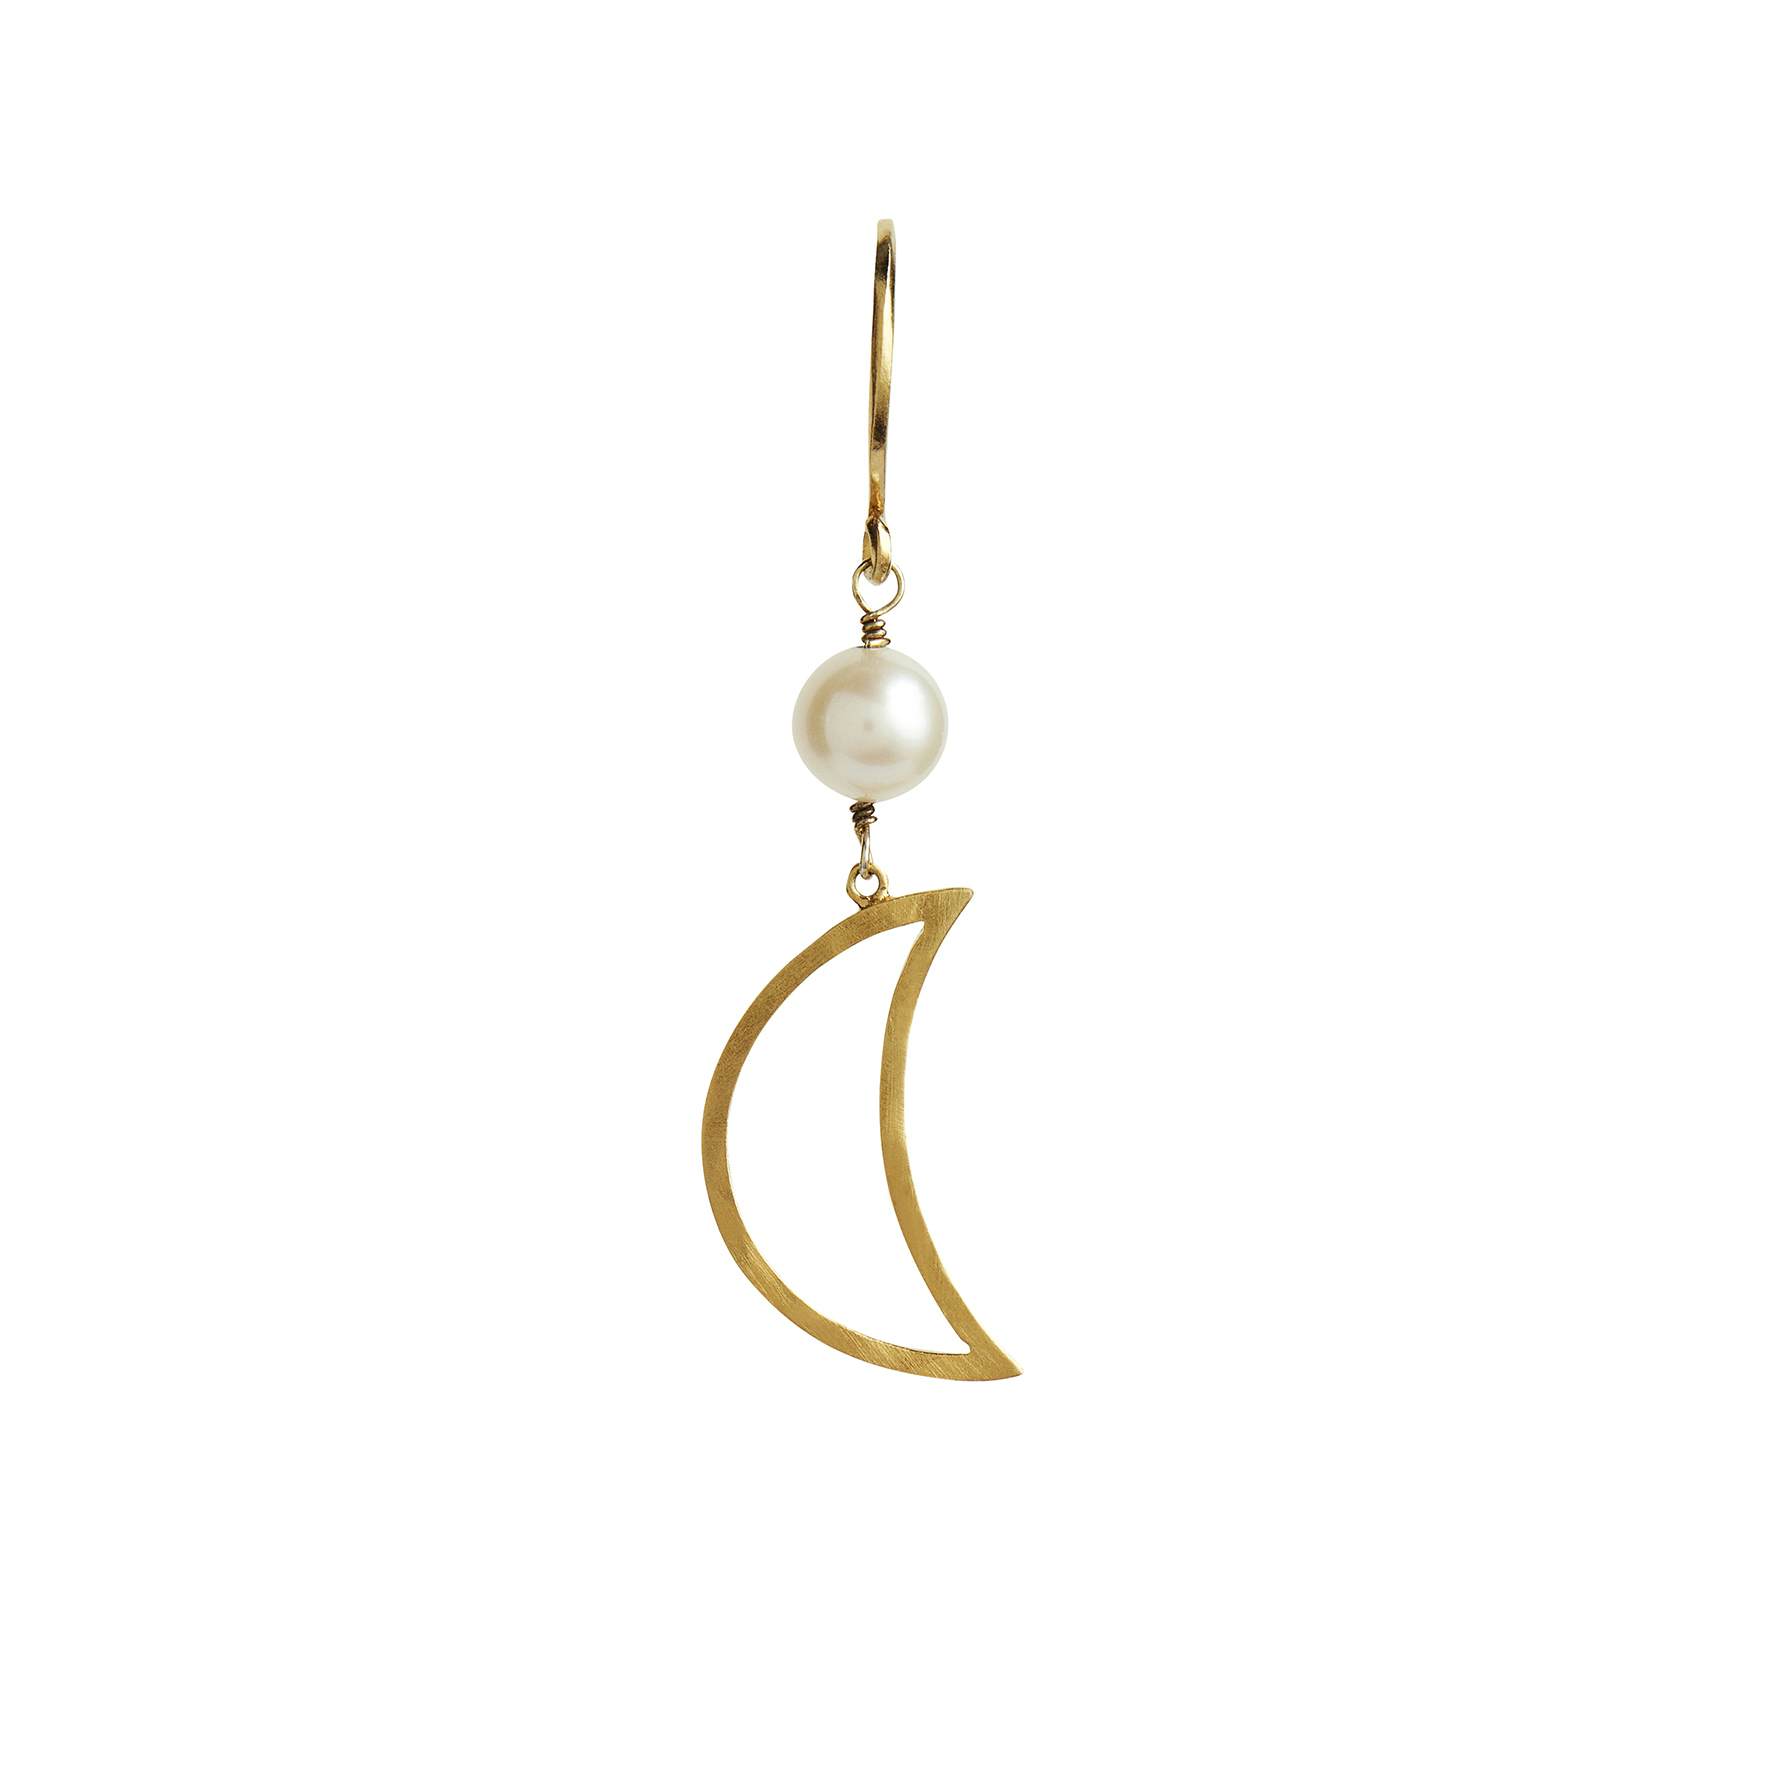 Bella Moon Earring With Pearl fra STINE A Jewelry i Forgyldt-Sølv Sterling 925